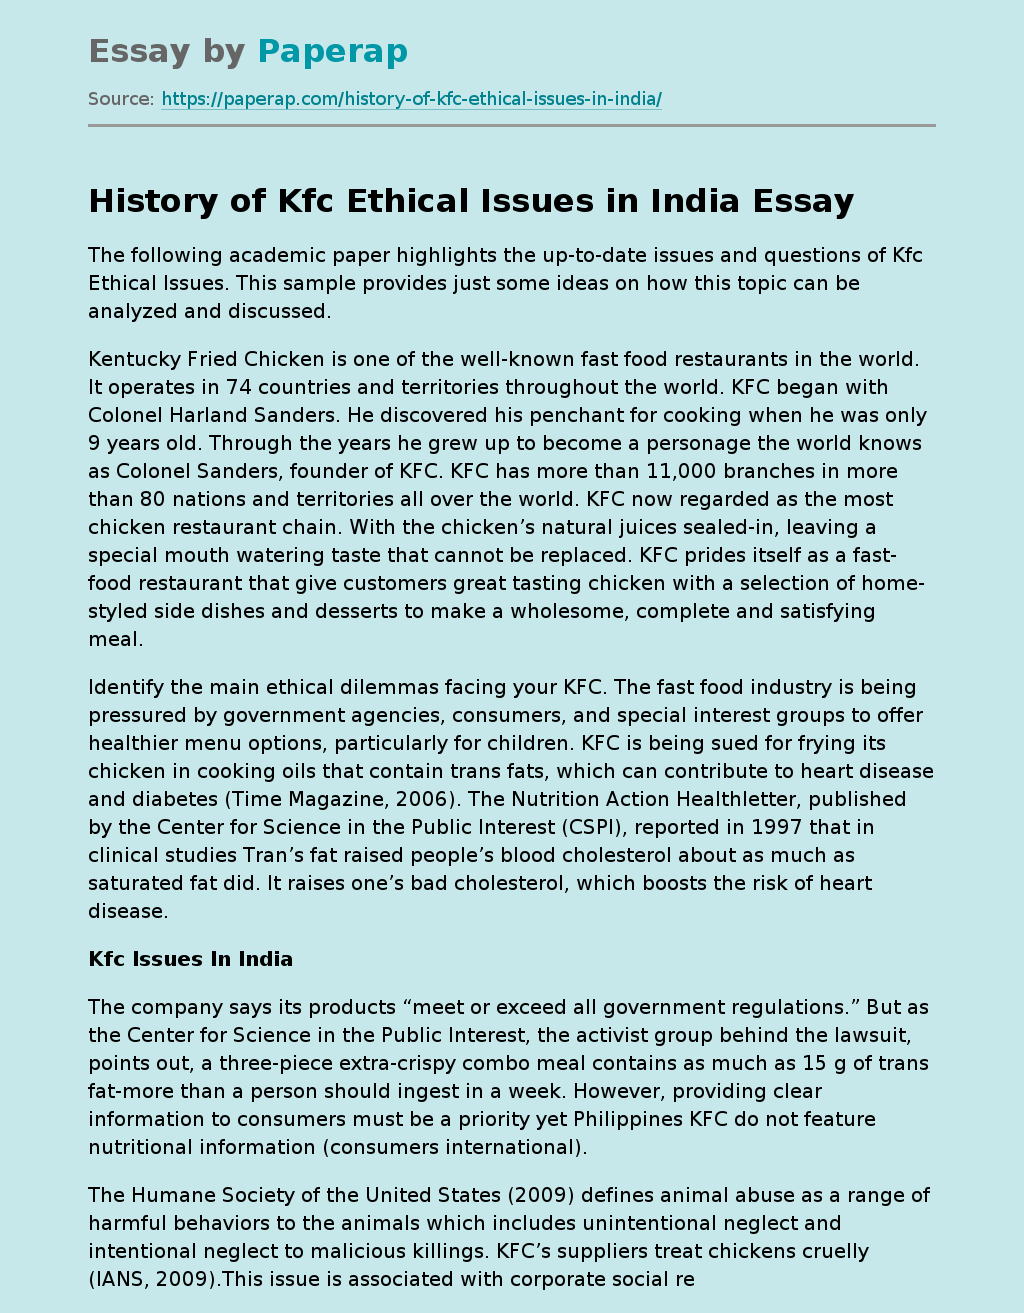 History of Kfc Ethical Issues in India